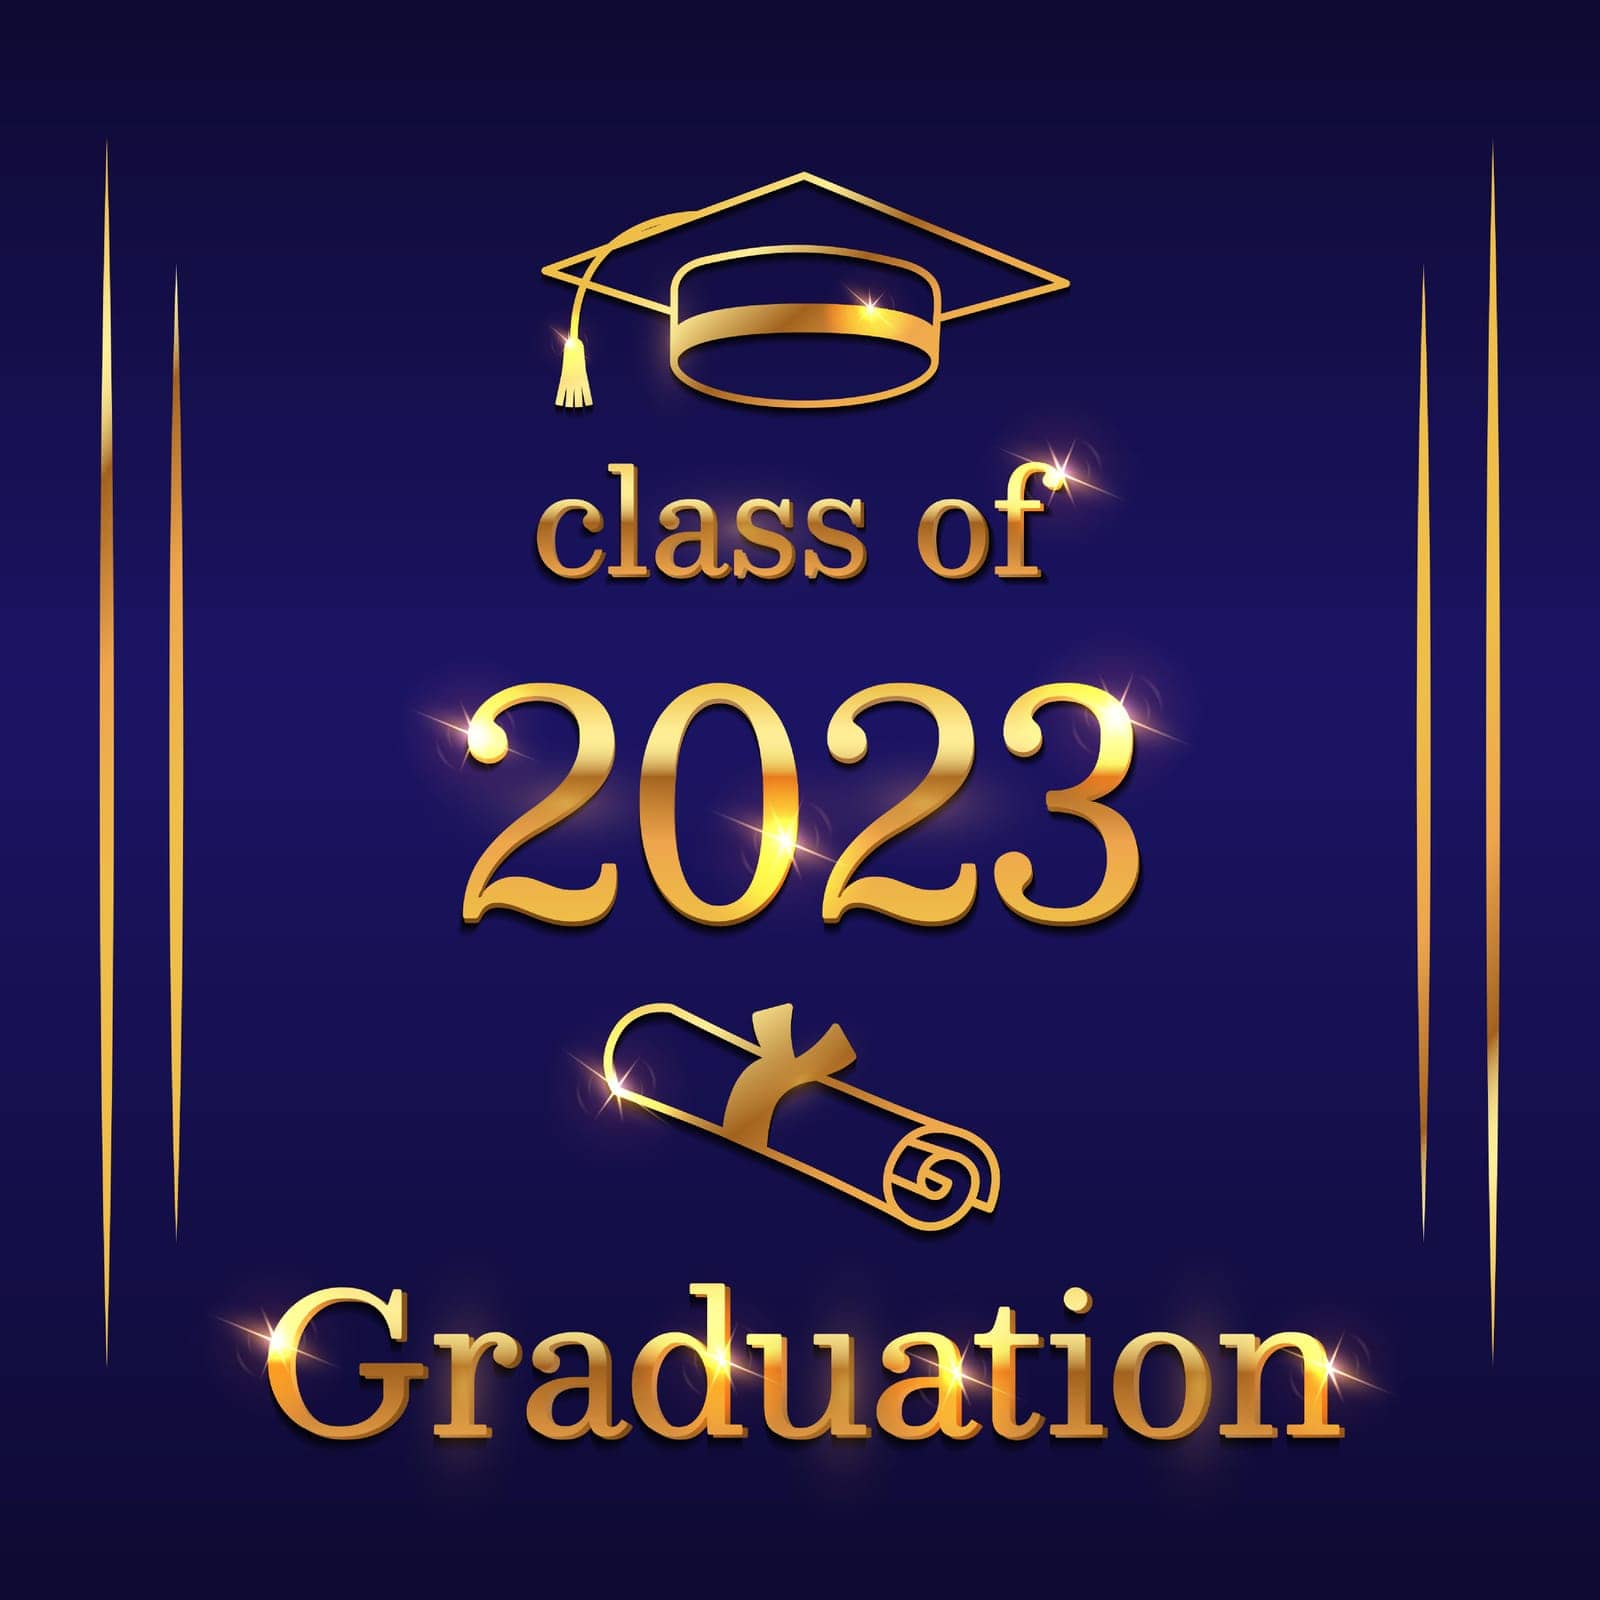 Celebrate your achievement in style with this elegant graduation background featuring a golden cap, certificate, and a congratulatory message on a blue backdrop. Vector illustration.